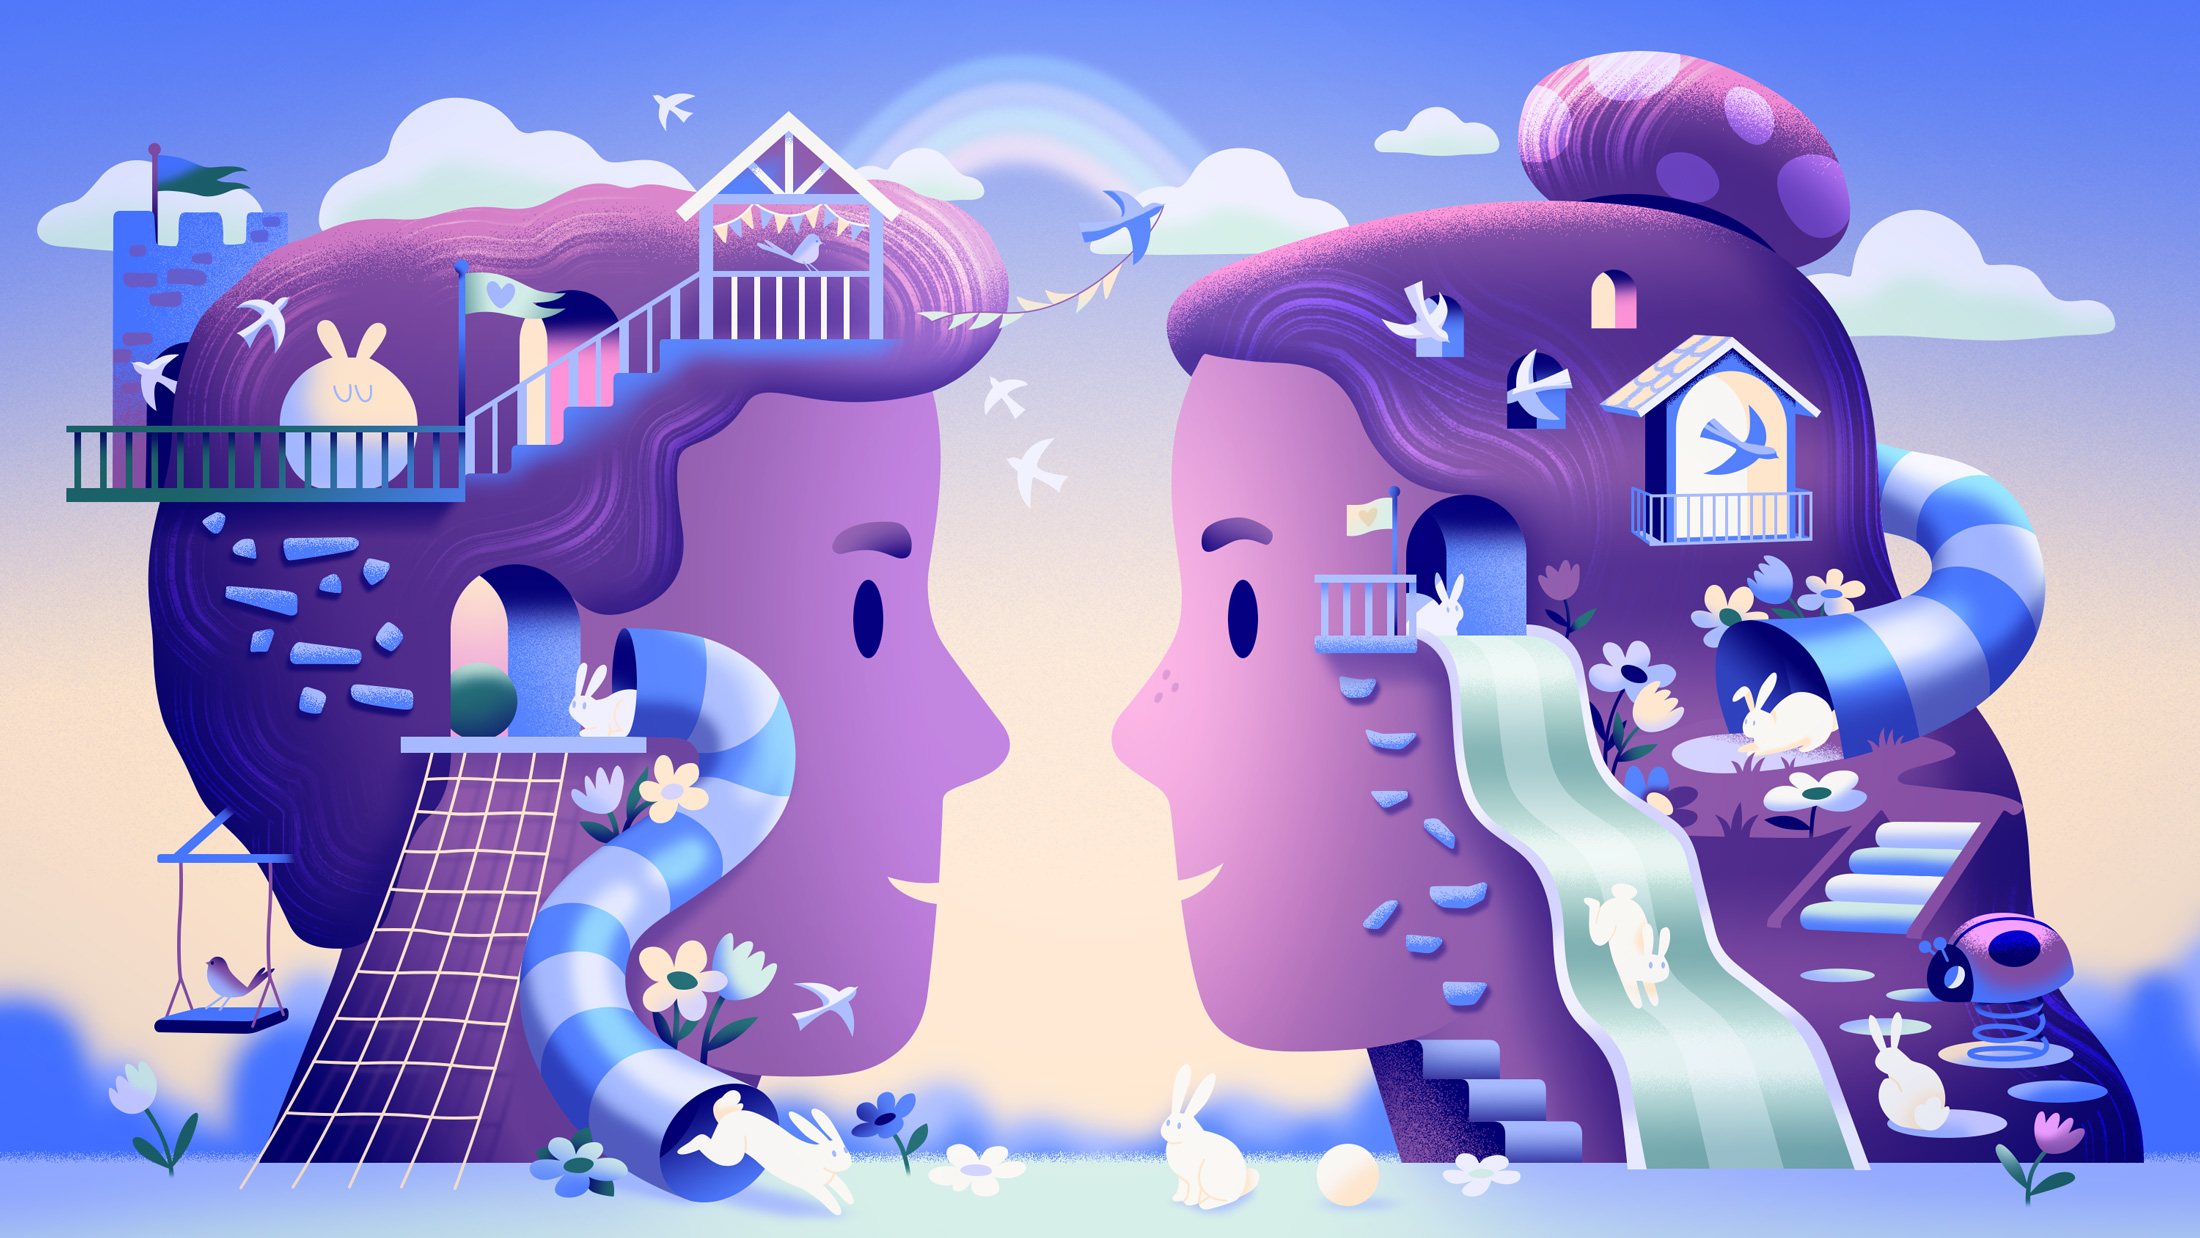 Editorial illustration for Keepler article 'Just press play: the joy of play in relationships'